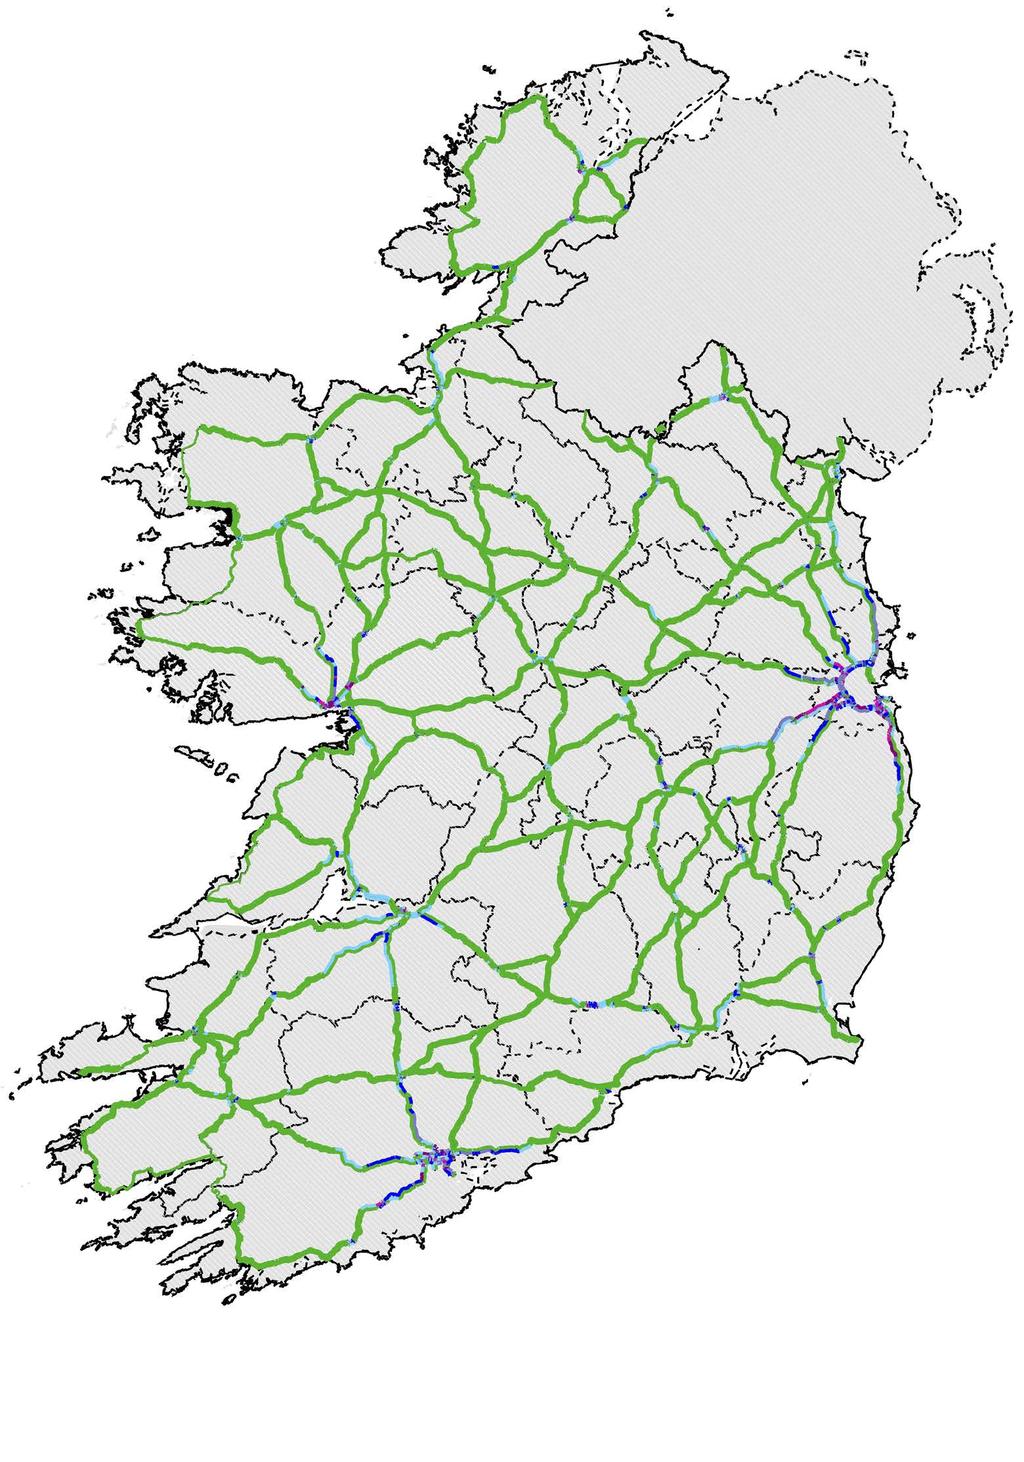 For further information see: Transport Research and Information Note: A Study of Lane Capacity, online at www.tii.